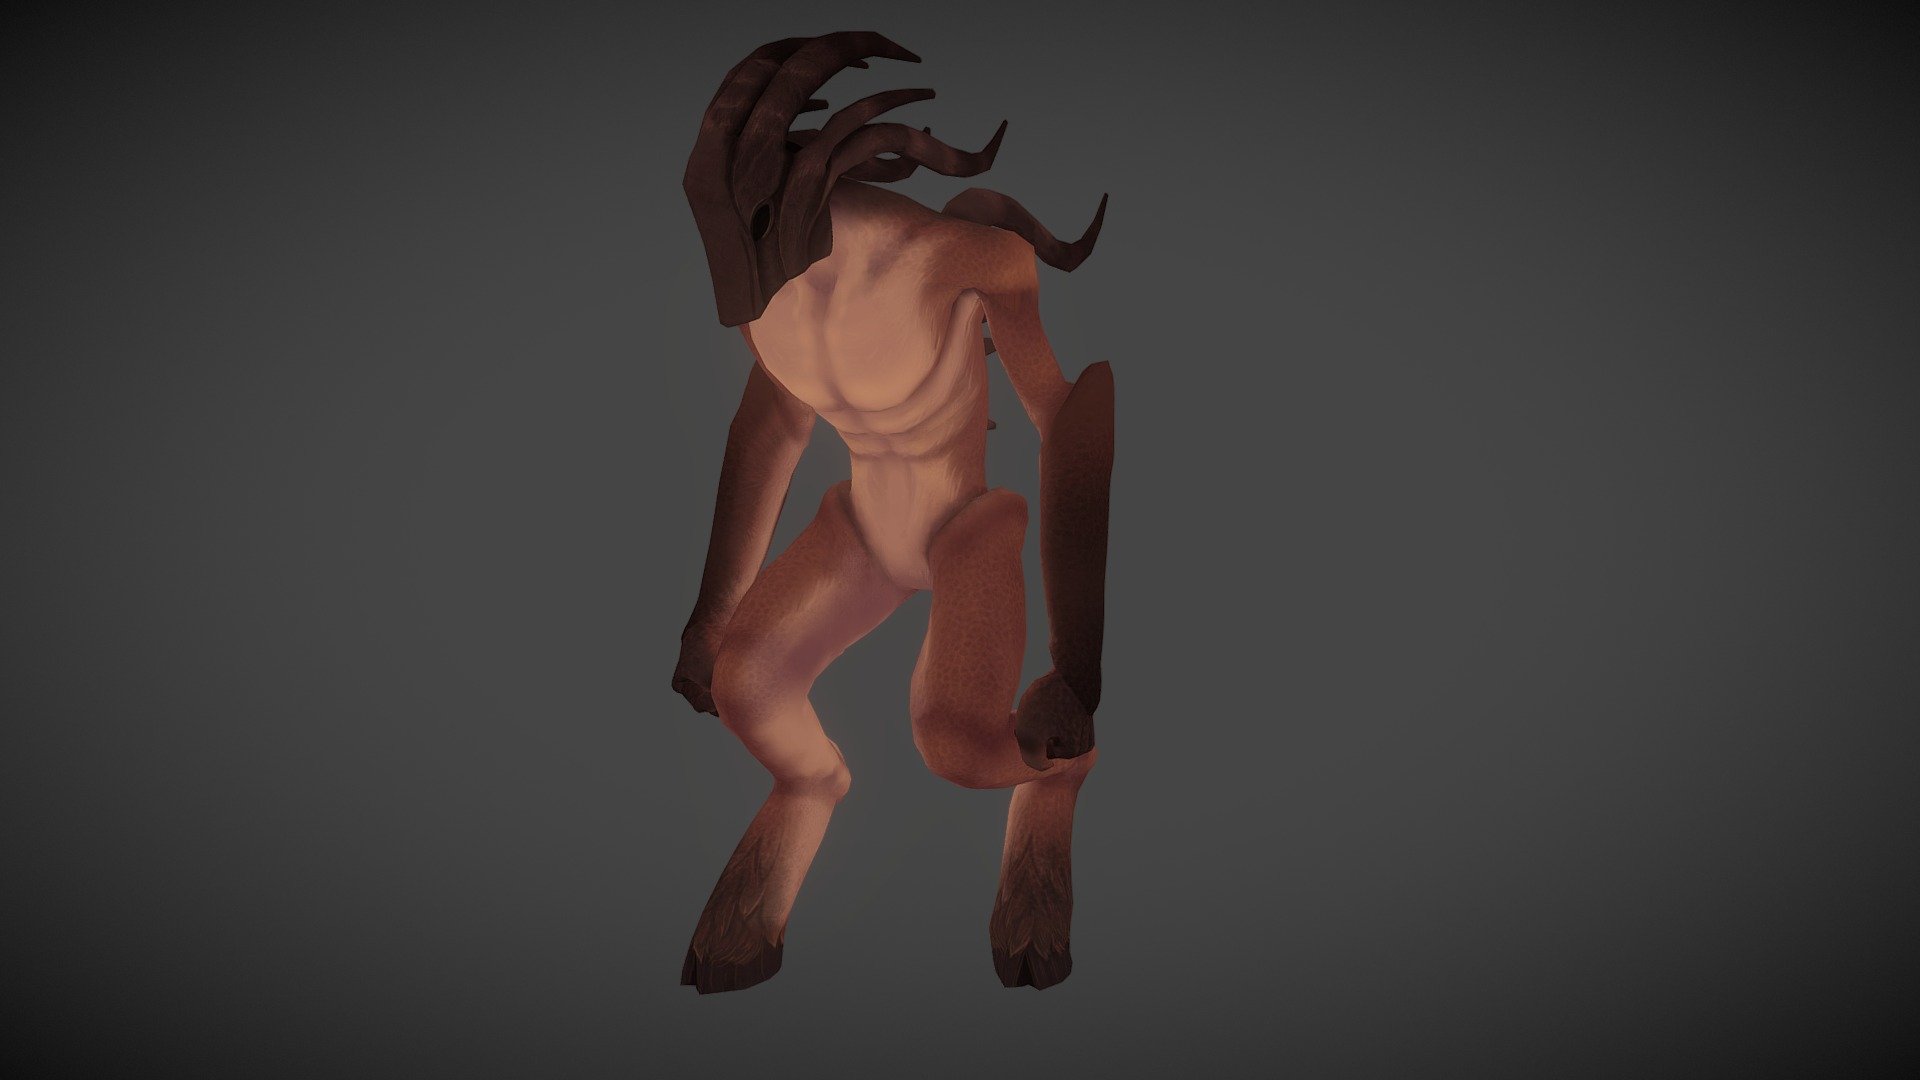 Model of one of the monsters for a game I used to work on 
Grime 3D souls like platformer 
Creature Concept by Yarden Weissbrot
Texturing by me on Mudbox 
(I didnt texture the creatures for the game, I did it for fun)

Rigging and animations by me on Auodesk Maya 2017 - Warrior - 3D model by Lepler 3d model